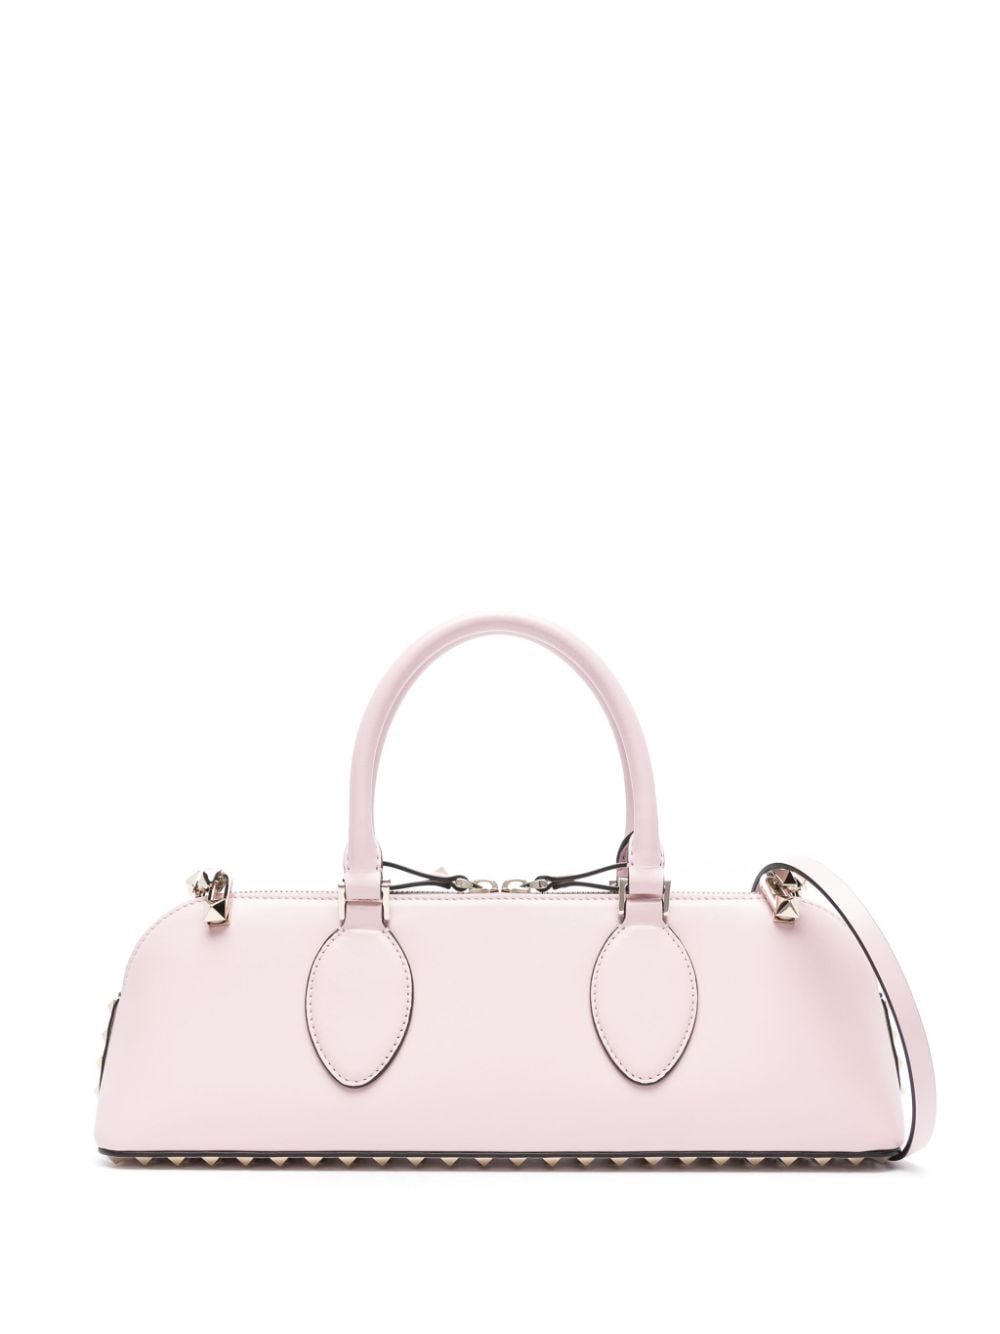 VALENTINO Rose Quartz Rockstud Tote: A Timeless and Sophisticated Statement for Women